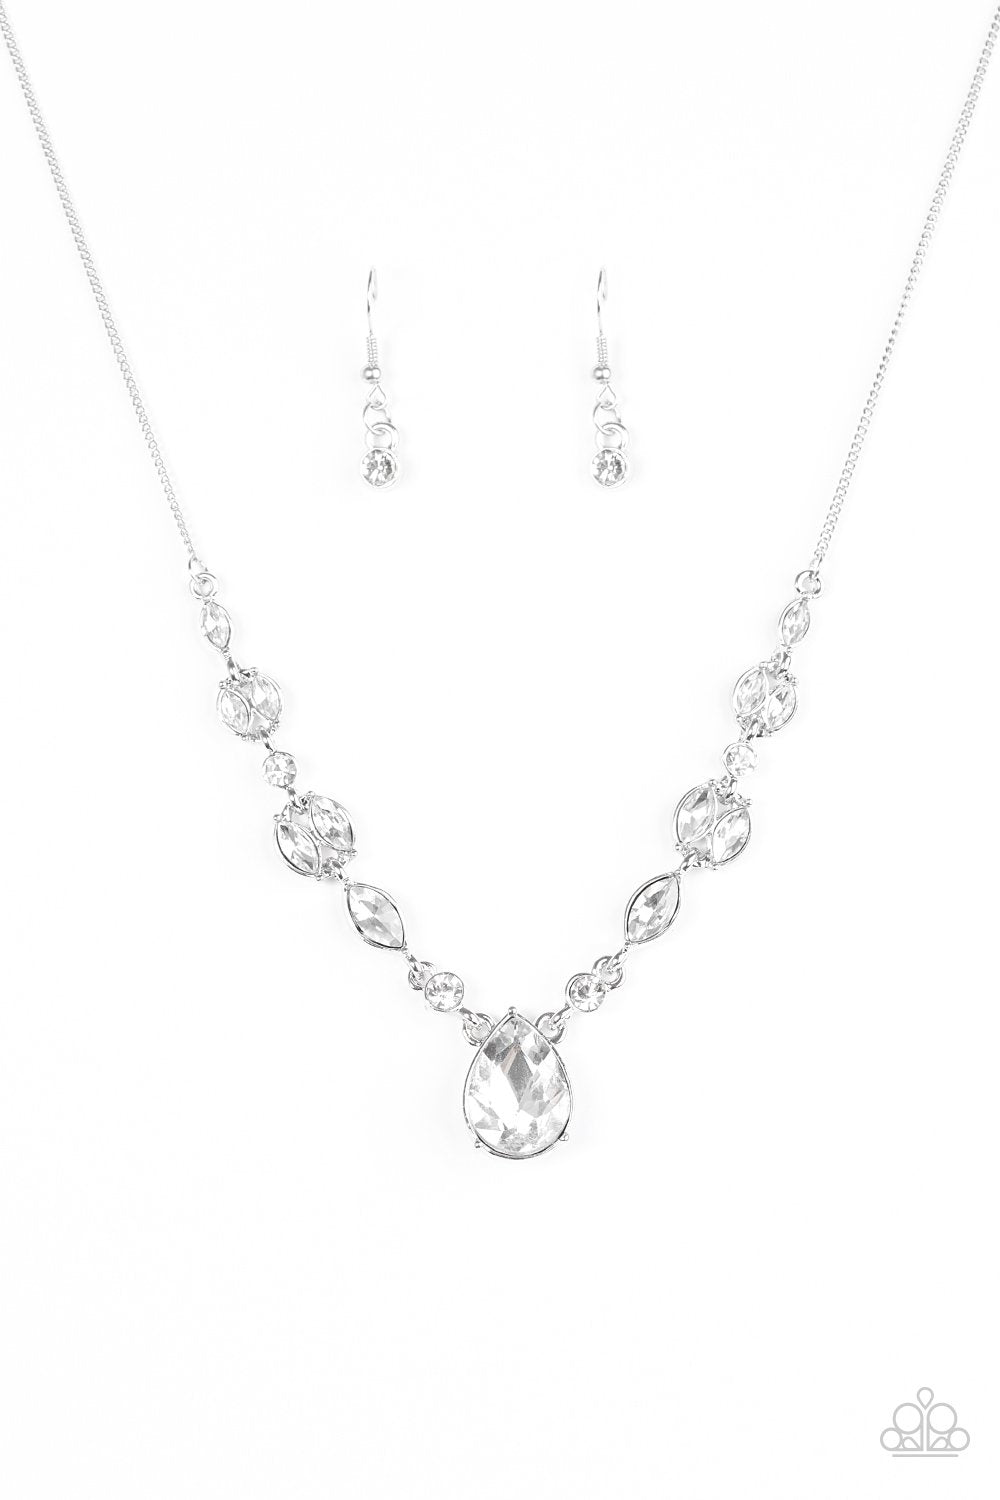 Royal Rendezvous White Teardrop Rhinestone Necklace - Paparazzi Accessories-CarasShop.com - $5 Jewelry by Cara Jewels